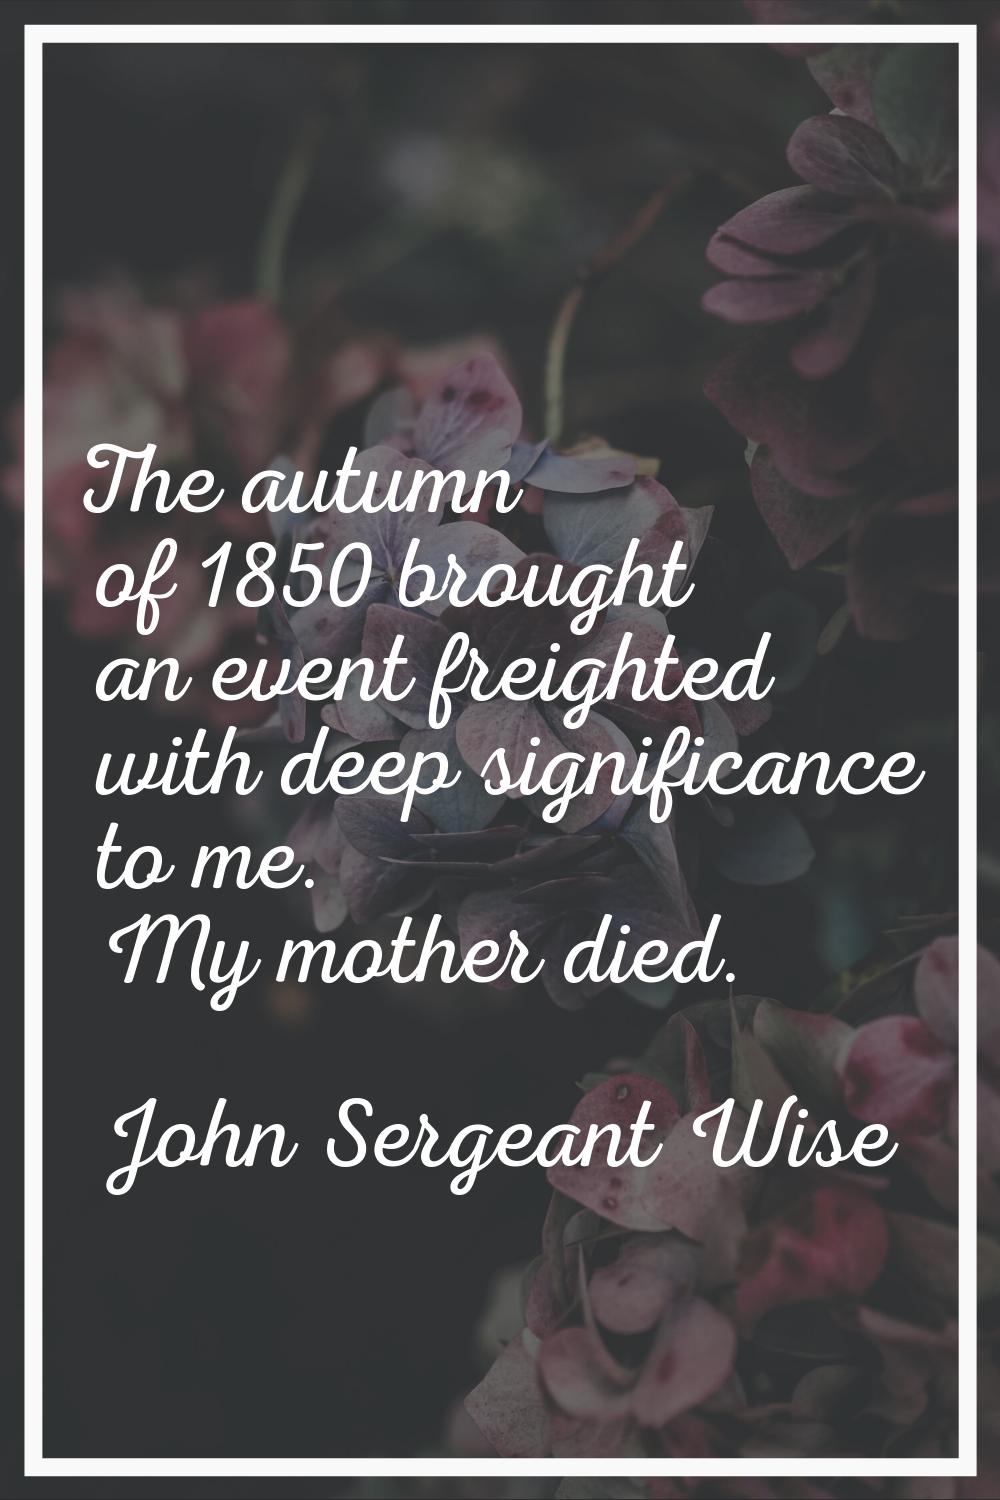 The autumn of 1850 brought an event freighted with deep significance to me. My mother died.